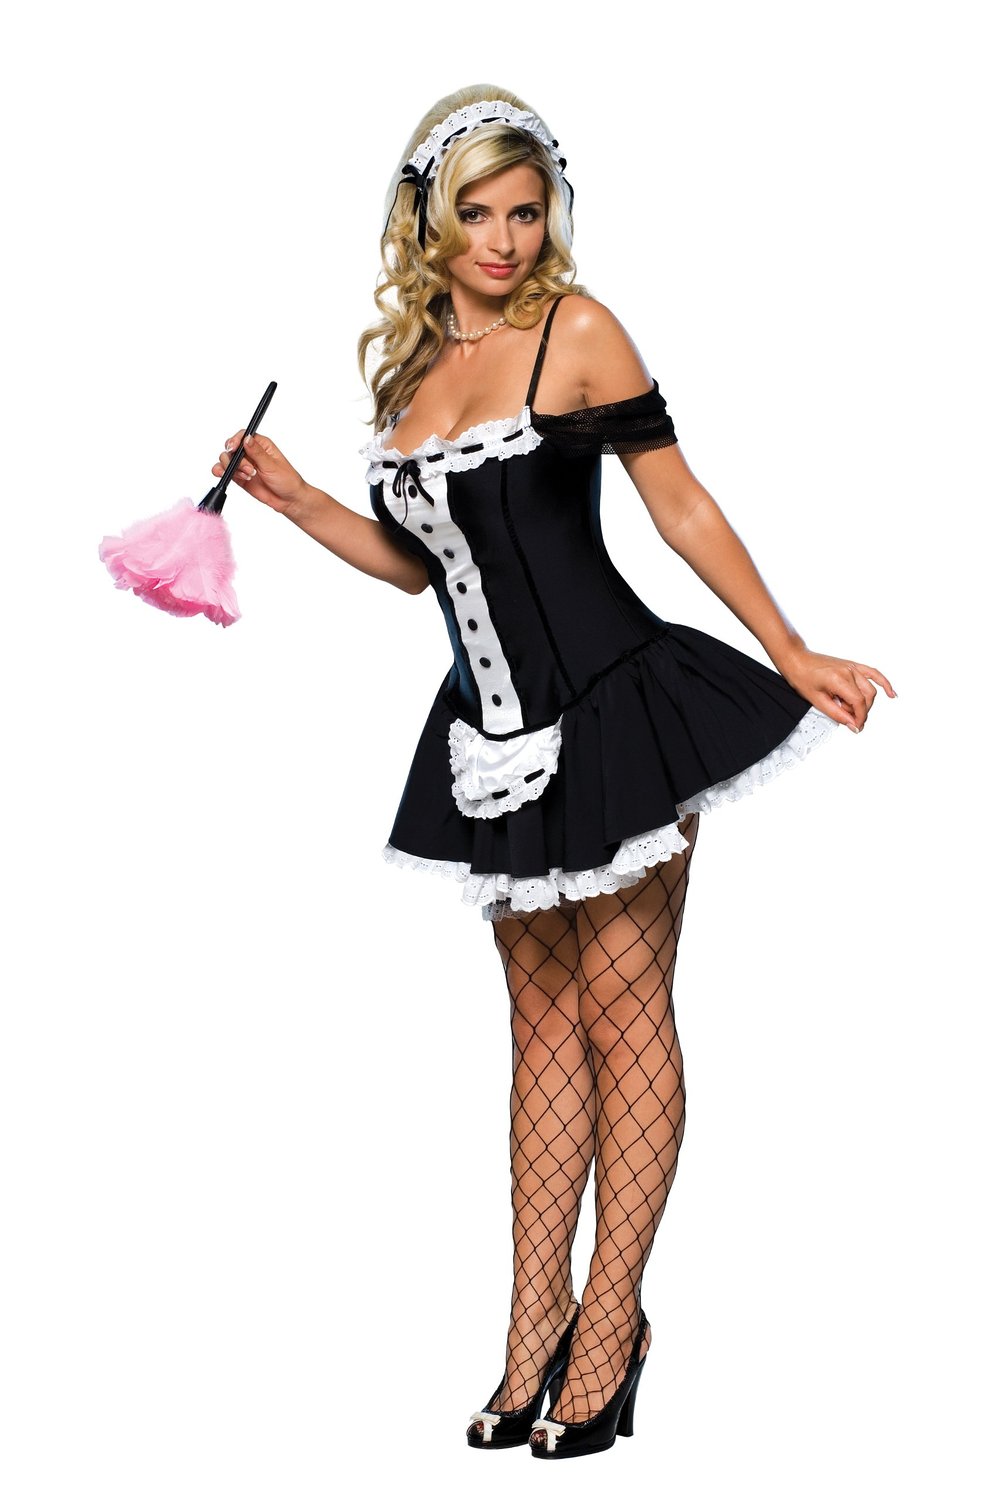 Archived - - Sexy Maids to Clean Your Apt/Home DAILY! 5 